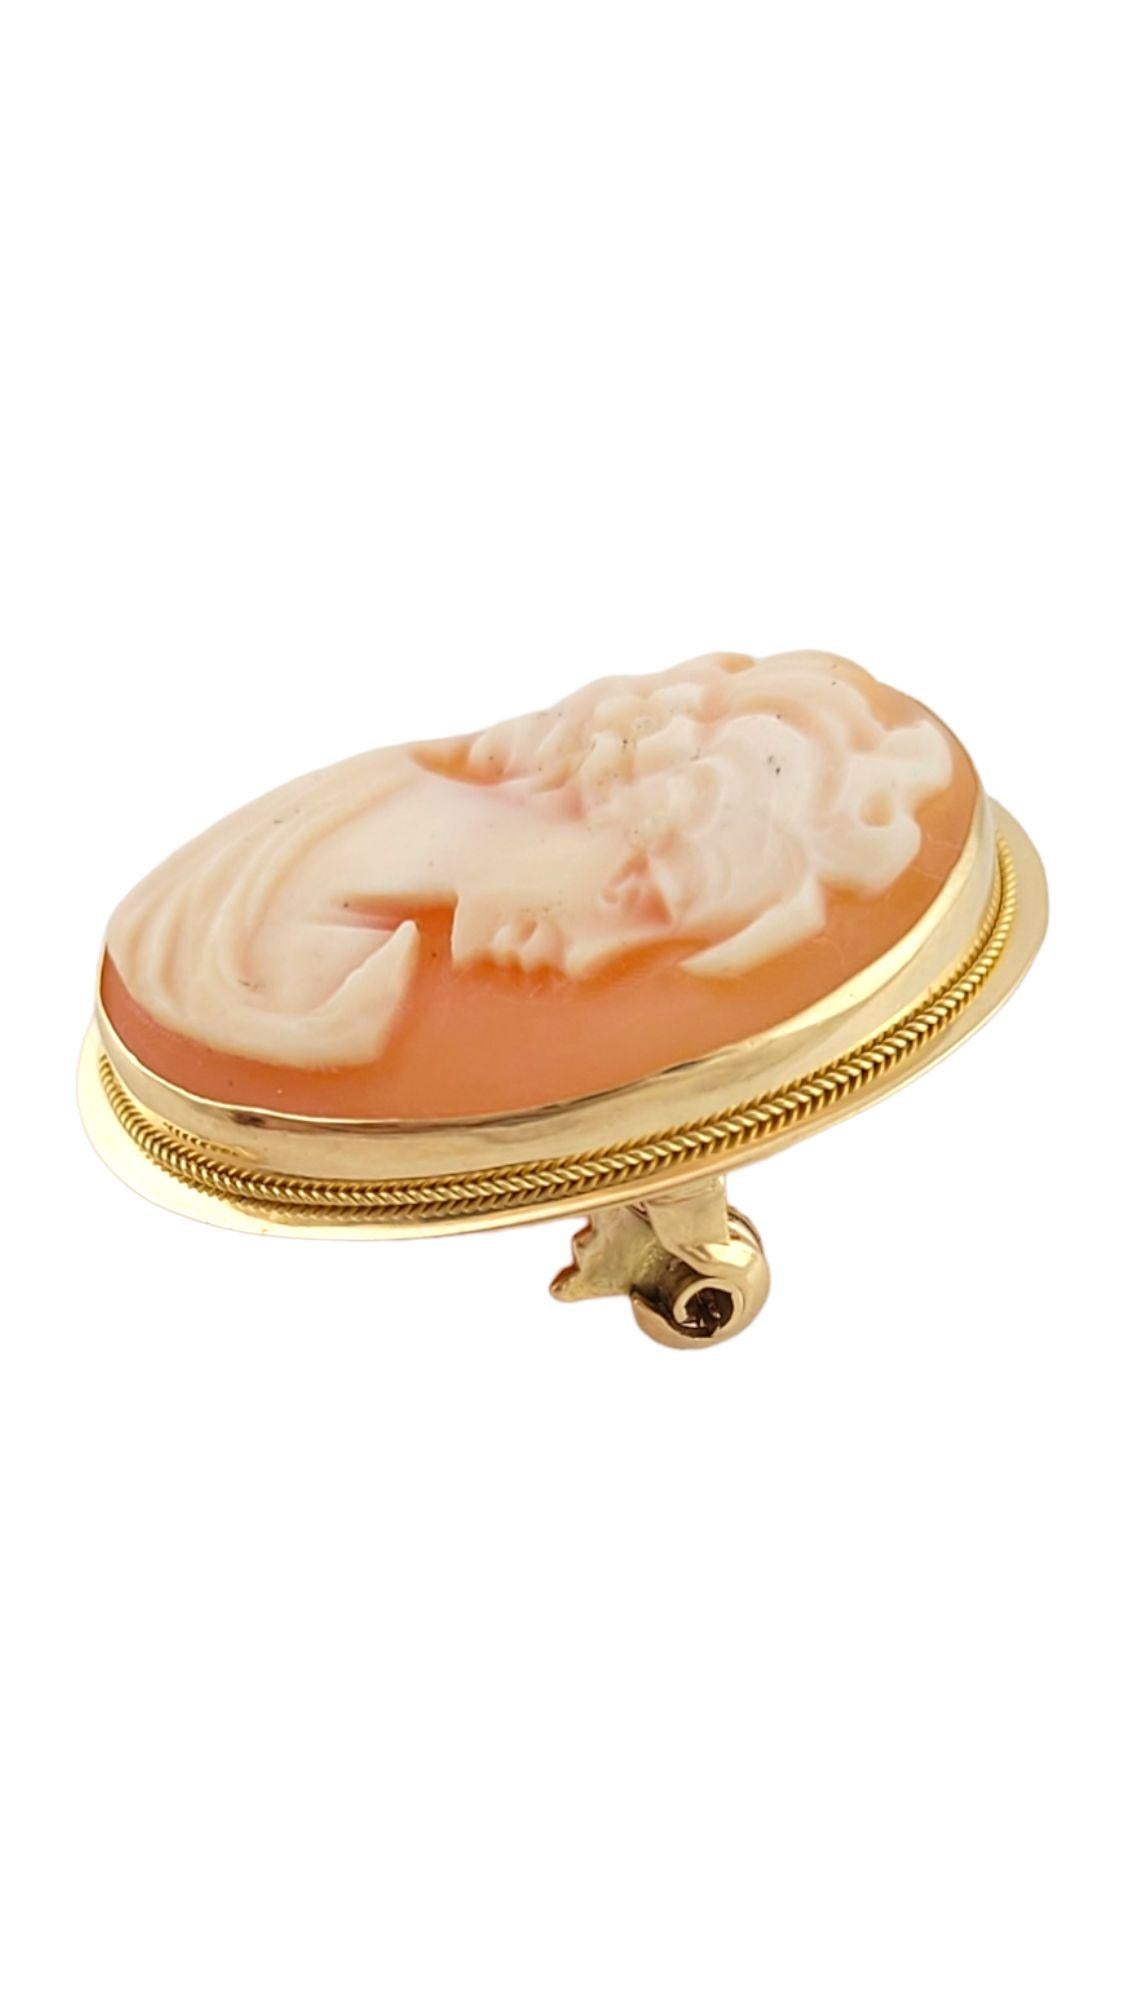 This gorgeous cameo pin doubles as a pendant as well!

Size: 22.58mm X 17.79mm

Weight: 2.51 g. 1.6 dwt

Hallmark: 14Kt 95NA

*Chain not included*

Very good condition, professionally polished.

Will come packaged in a gift box or pouch (when